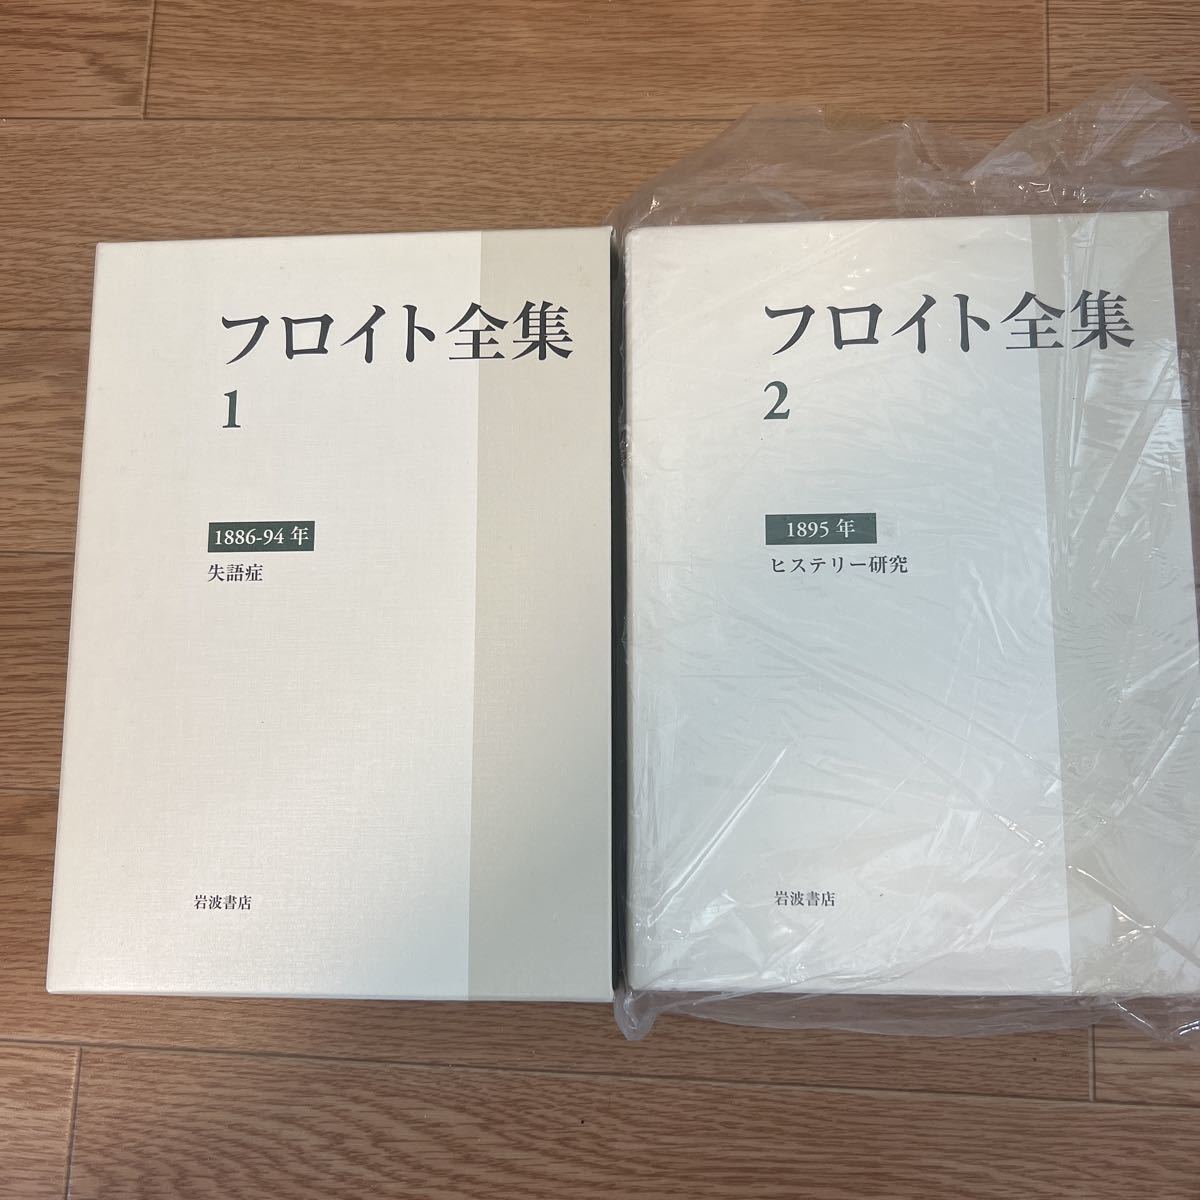  out of print!! rare!!froito complete set of works all 22 volume + another volume Iwanami bookstore inspection : dream judgement /. god analysis introduction / psychology / another volume attaching 